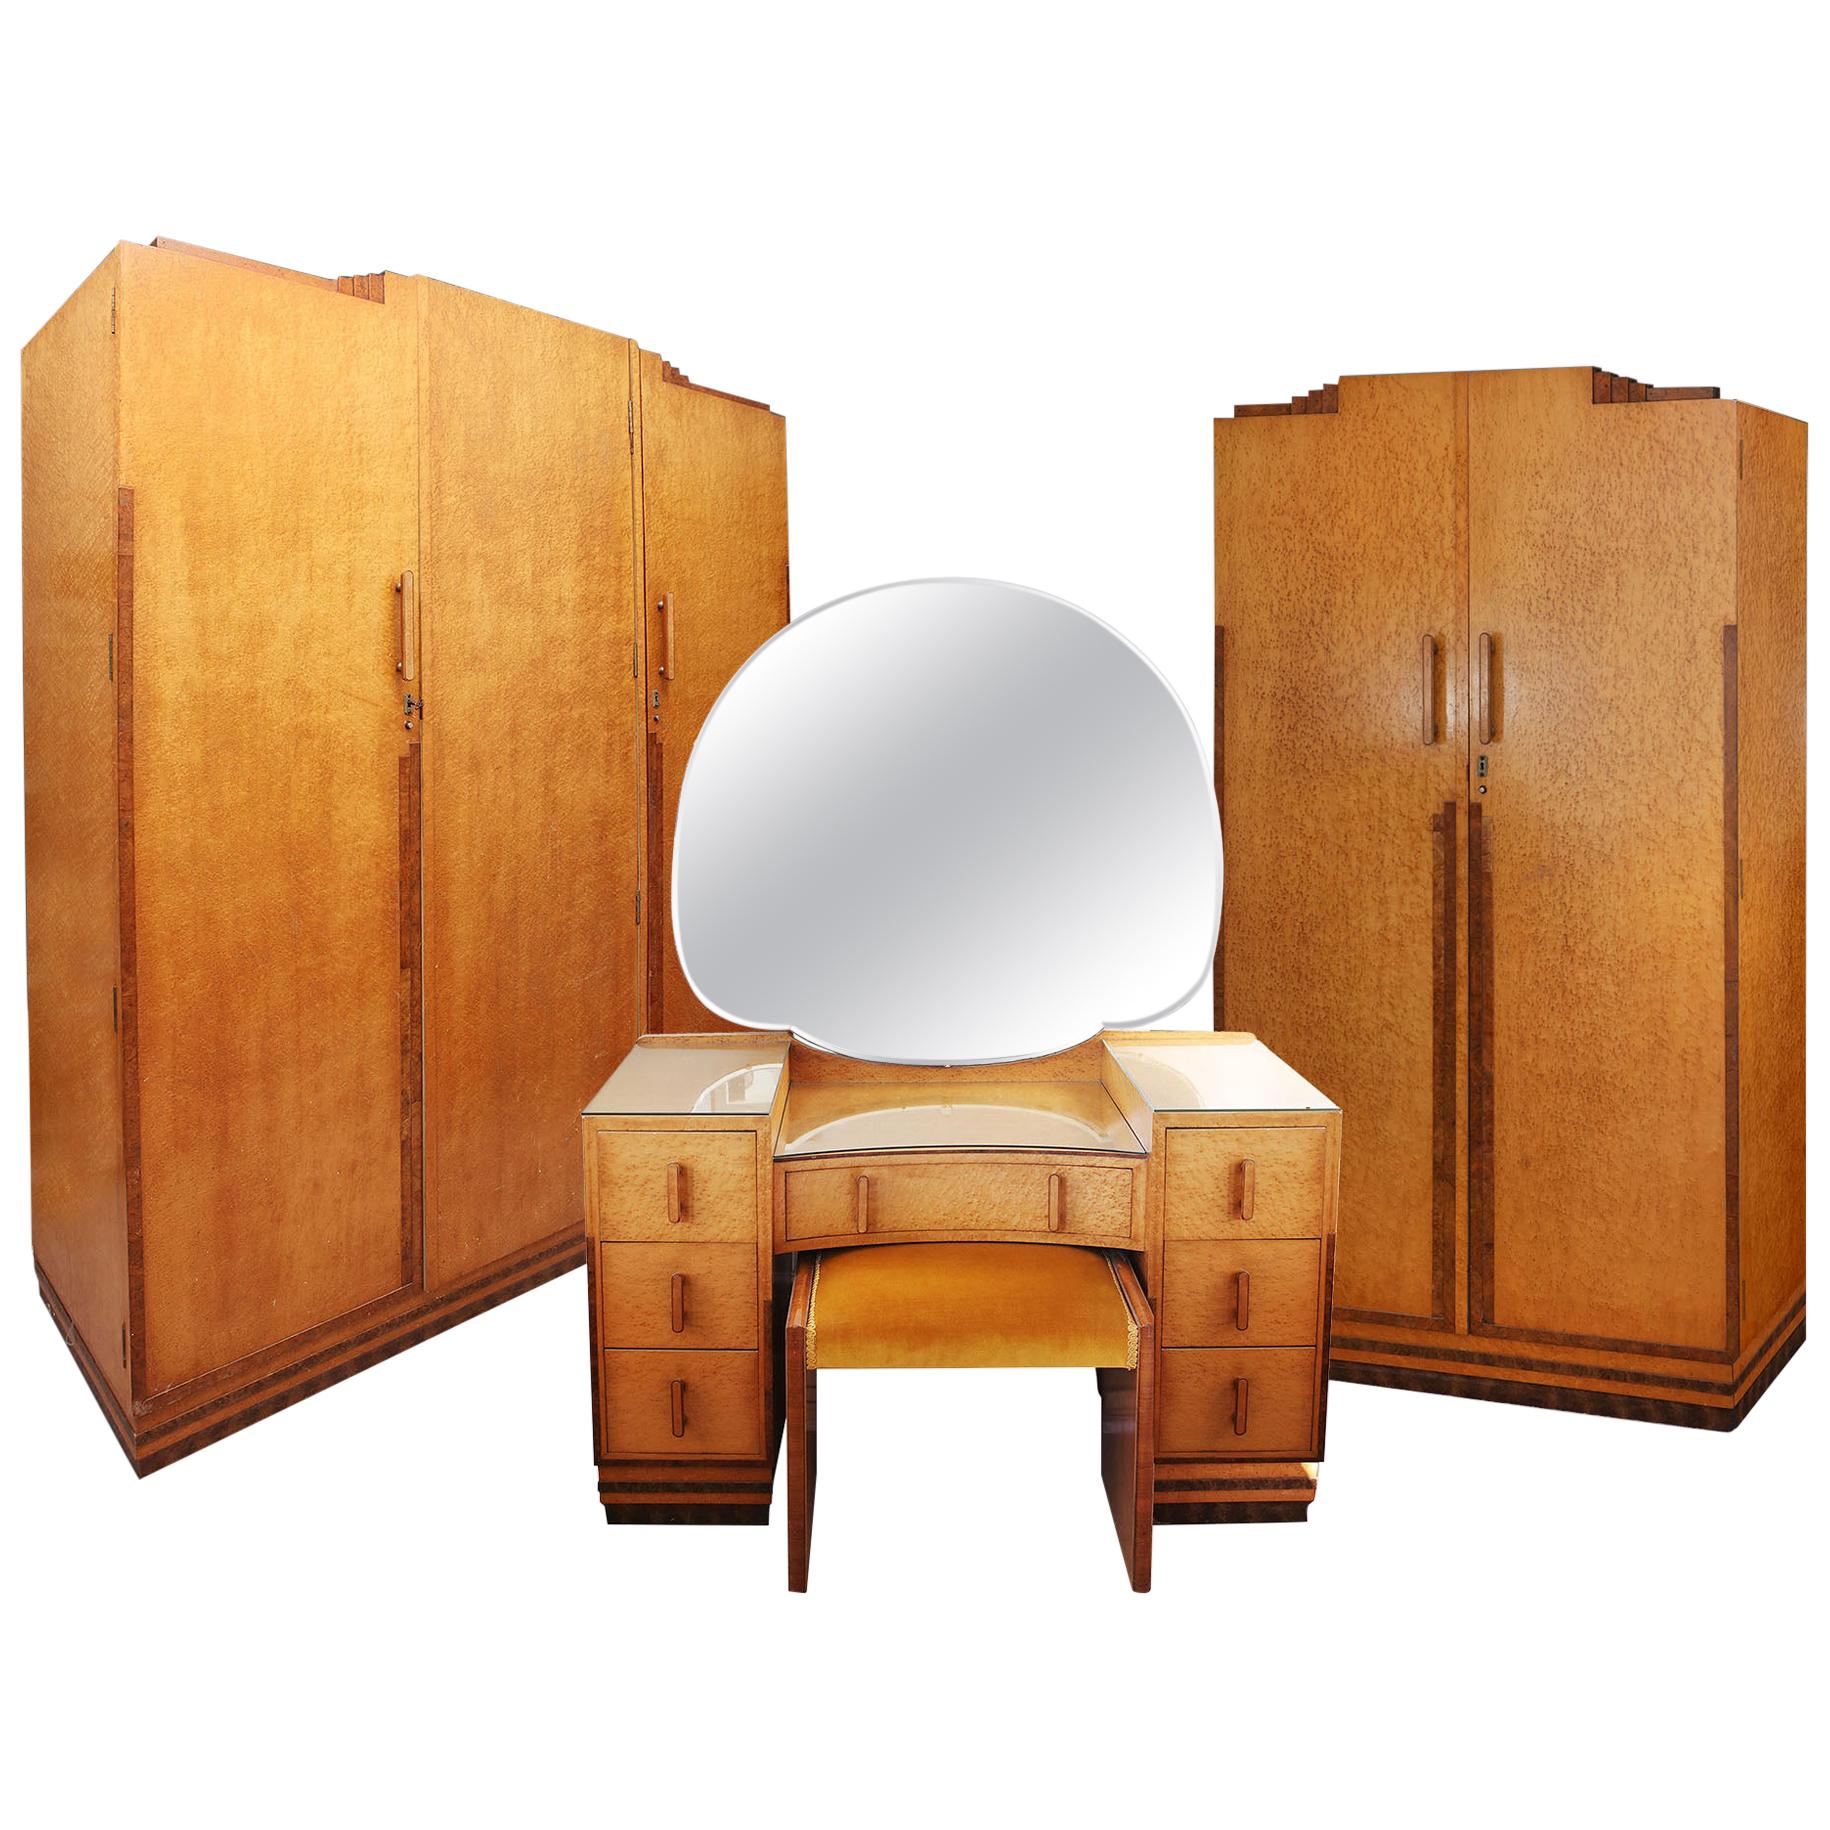 Birds Eye Maple Art Deco Bedroom Suite by Caplans Cabinets Dressing Table